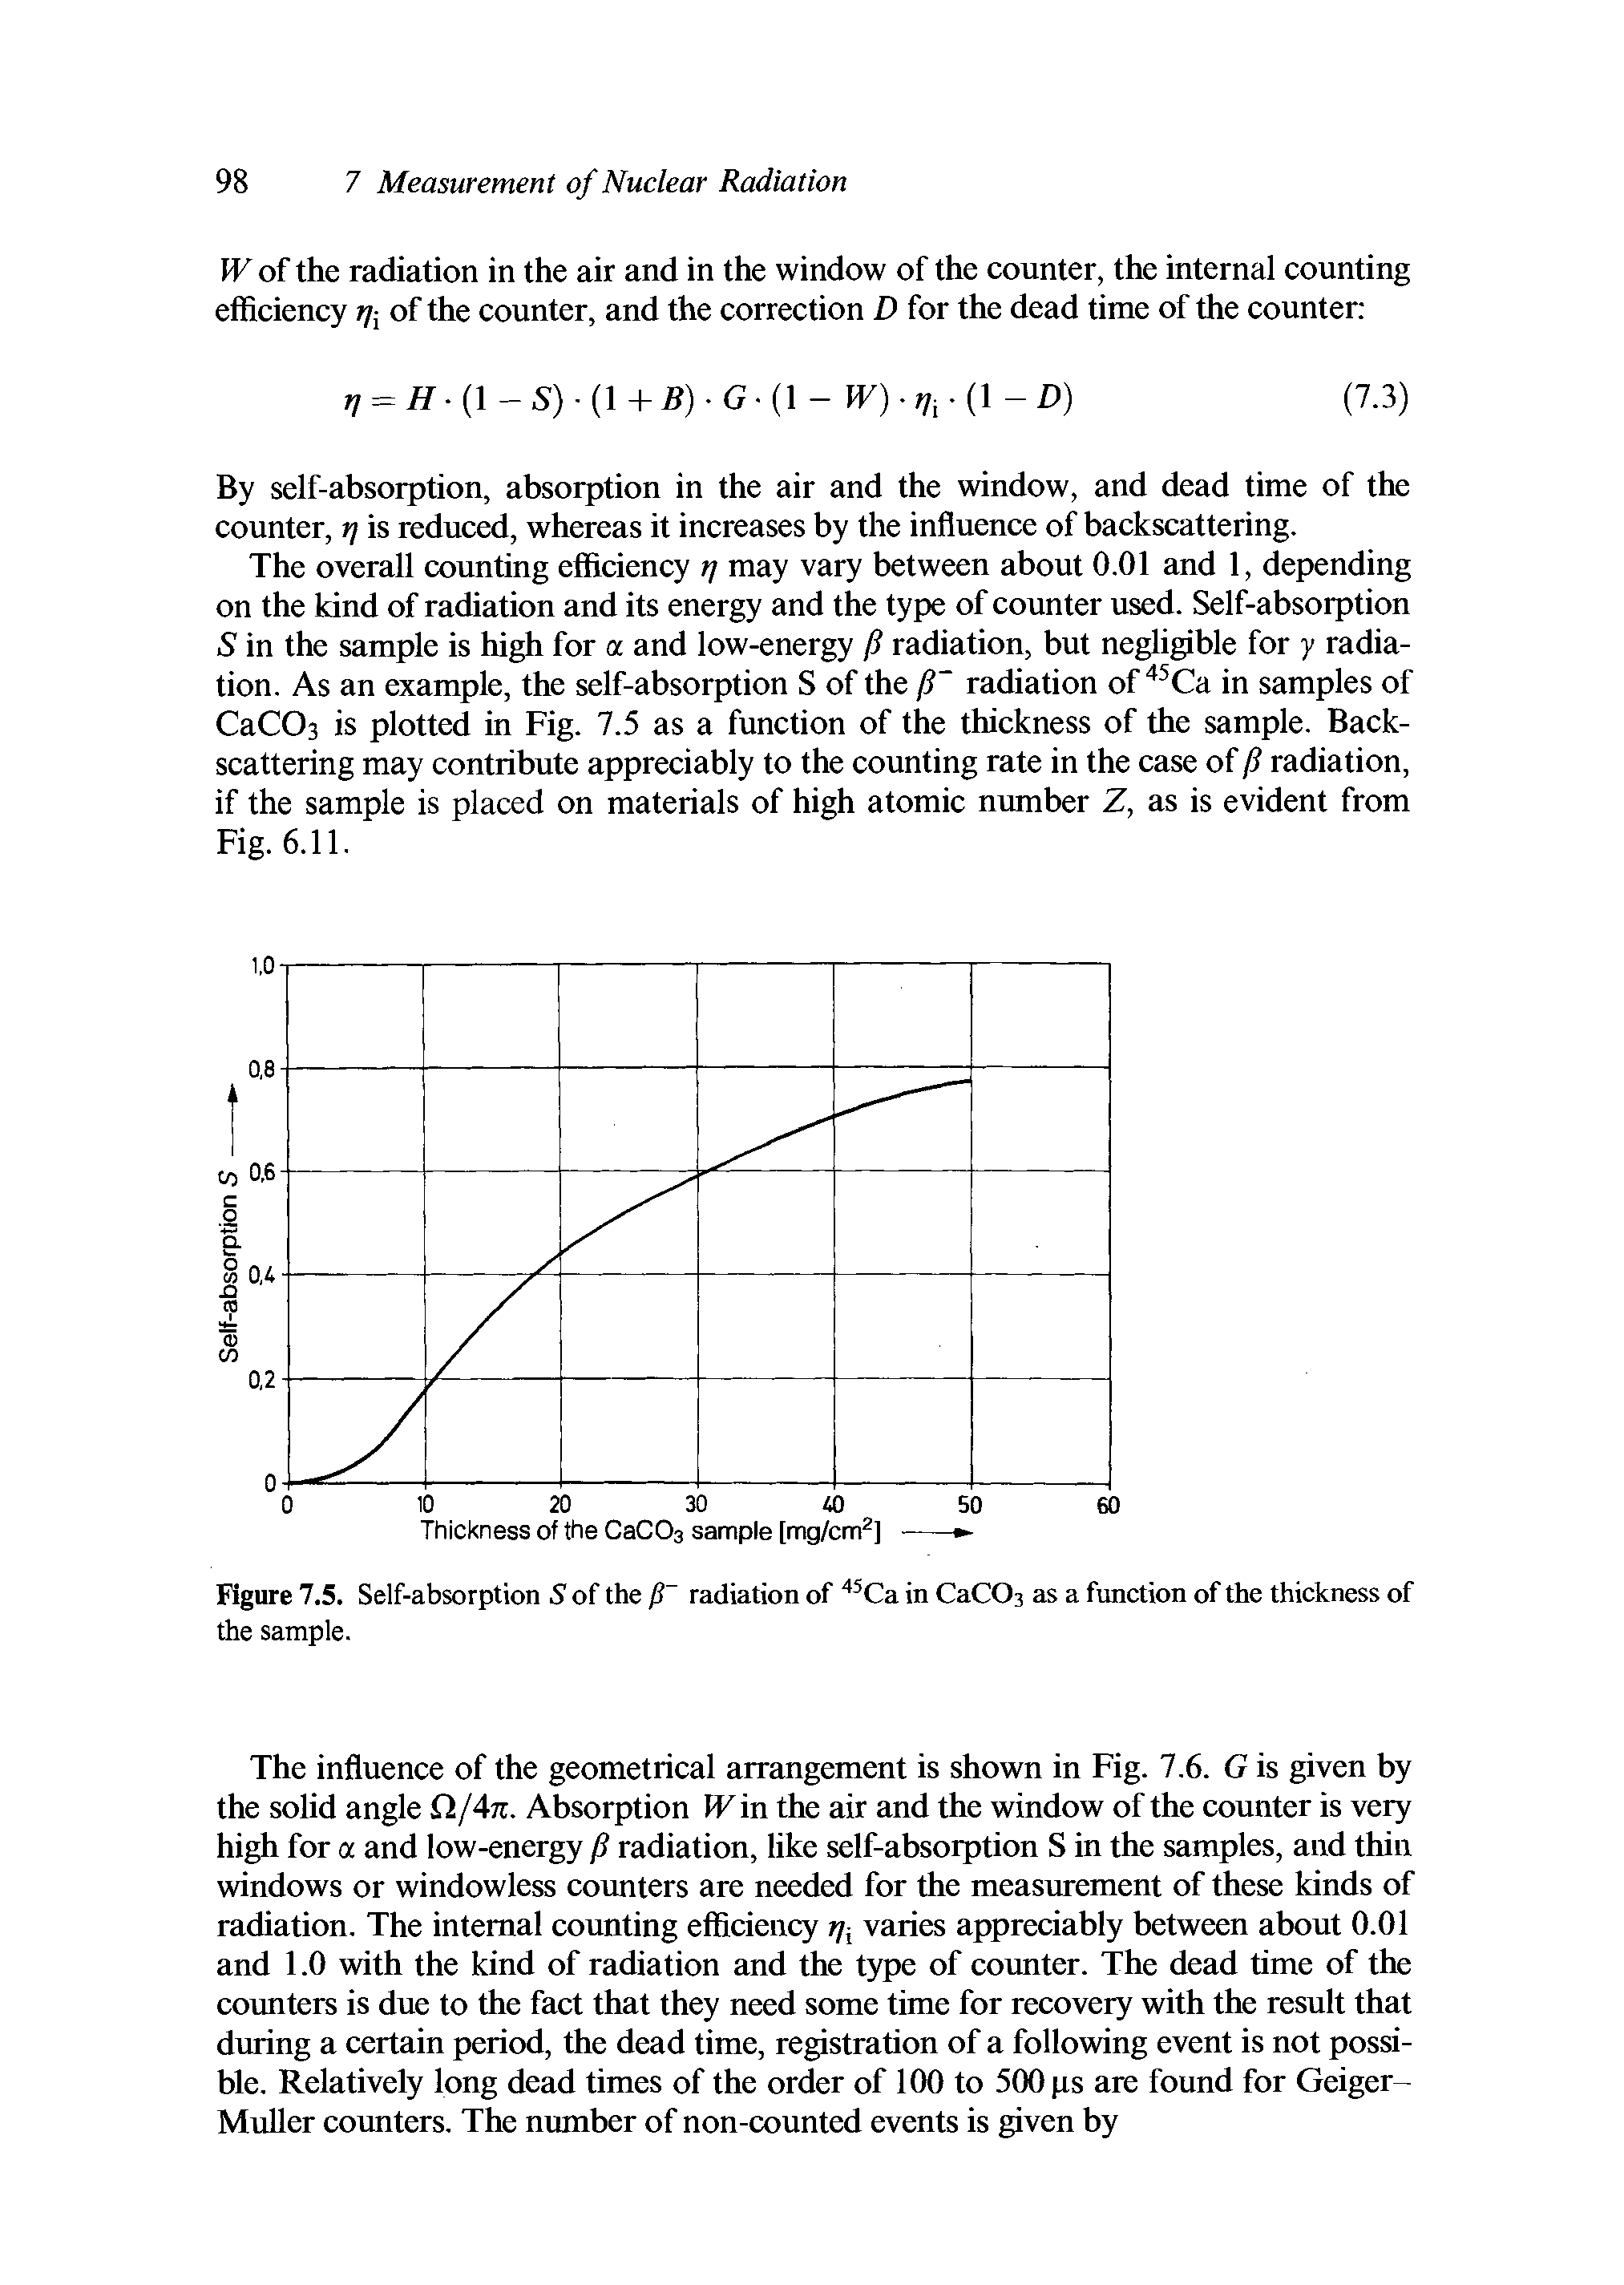 Figure 7.5. Self-absorption S of the radiation of Ca in CaCOs as a function of the thickness of the sample.